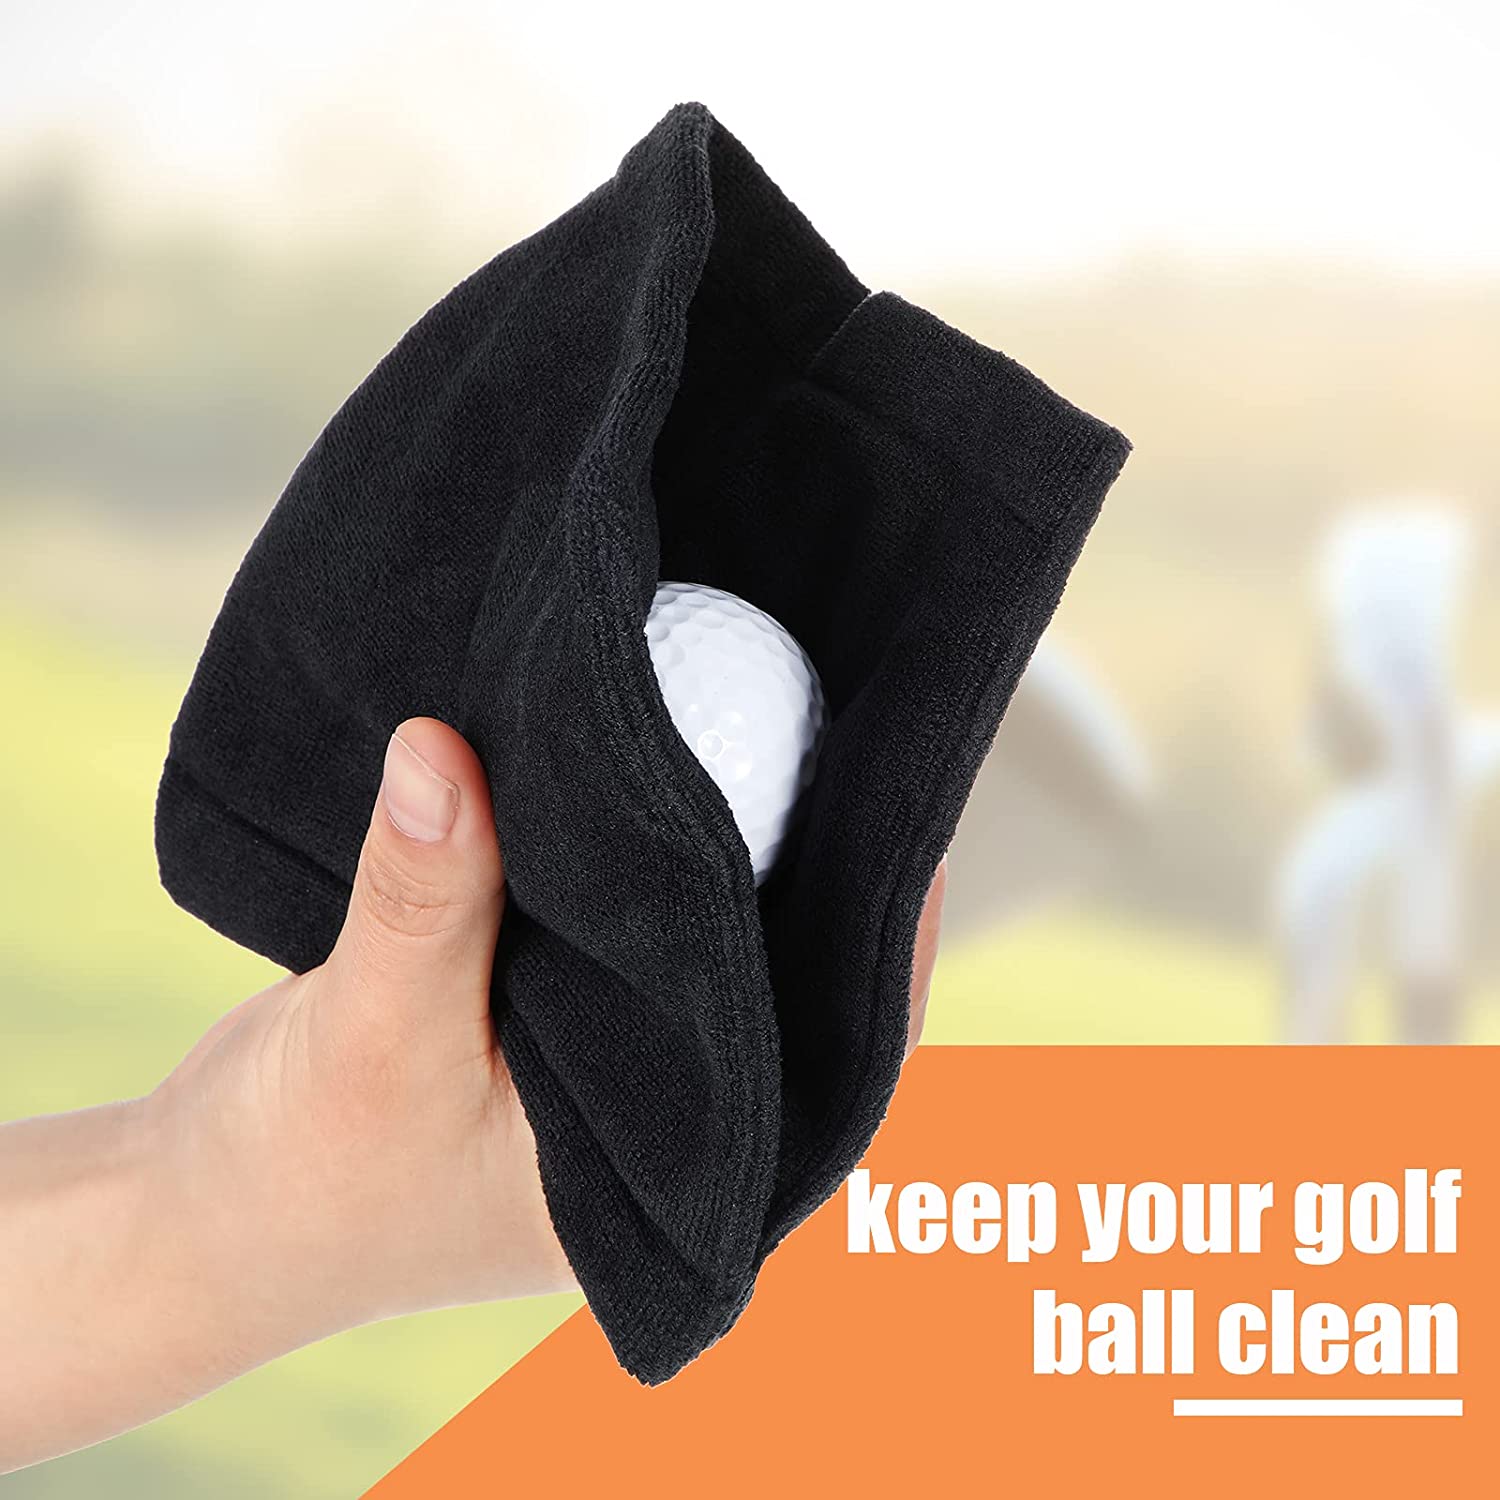 Golf Ball Towel 5.5 x 5.5 Inch Black Golf Wet and Dry Golf Towel Pocket Golf Towel with Clip Ball Towel Golf Ball Towel for Golf Course Exercise Towel (3 Pieces) - image 3 of 7